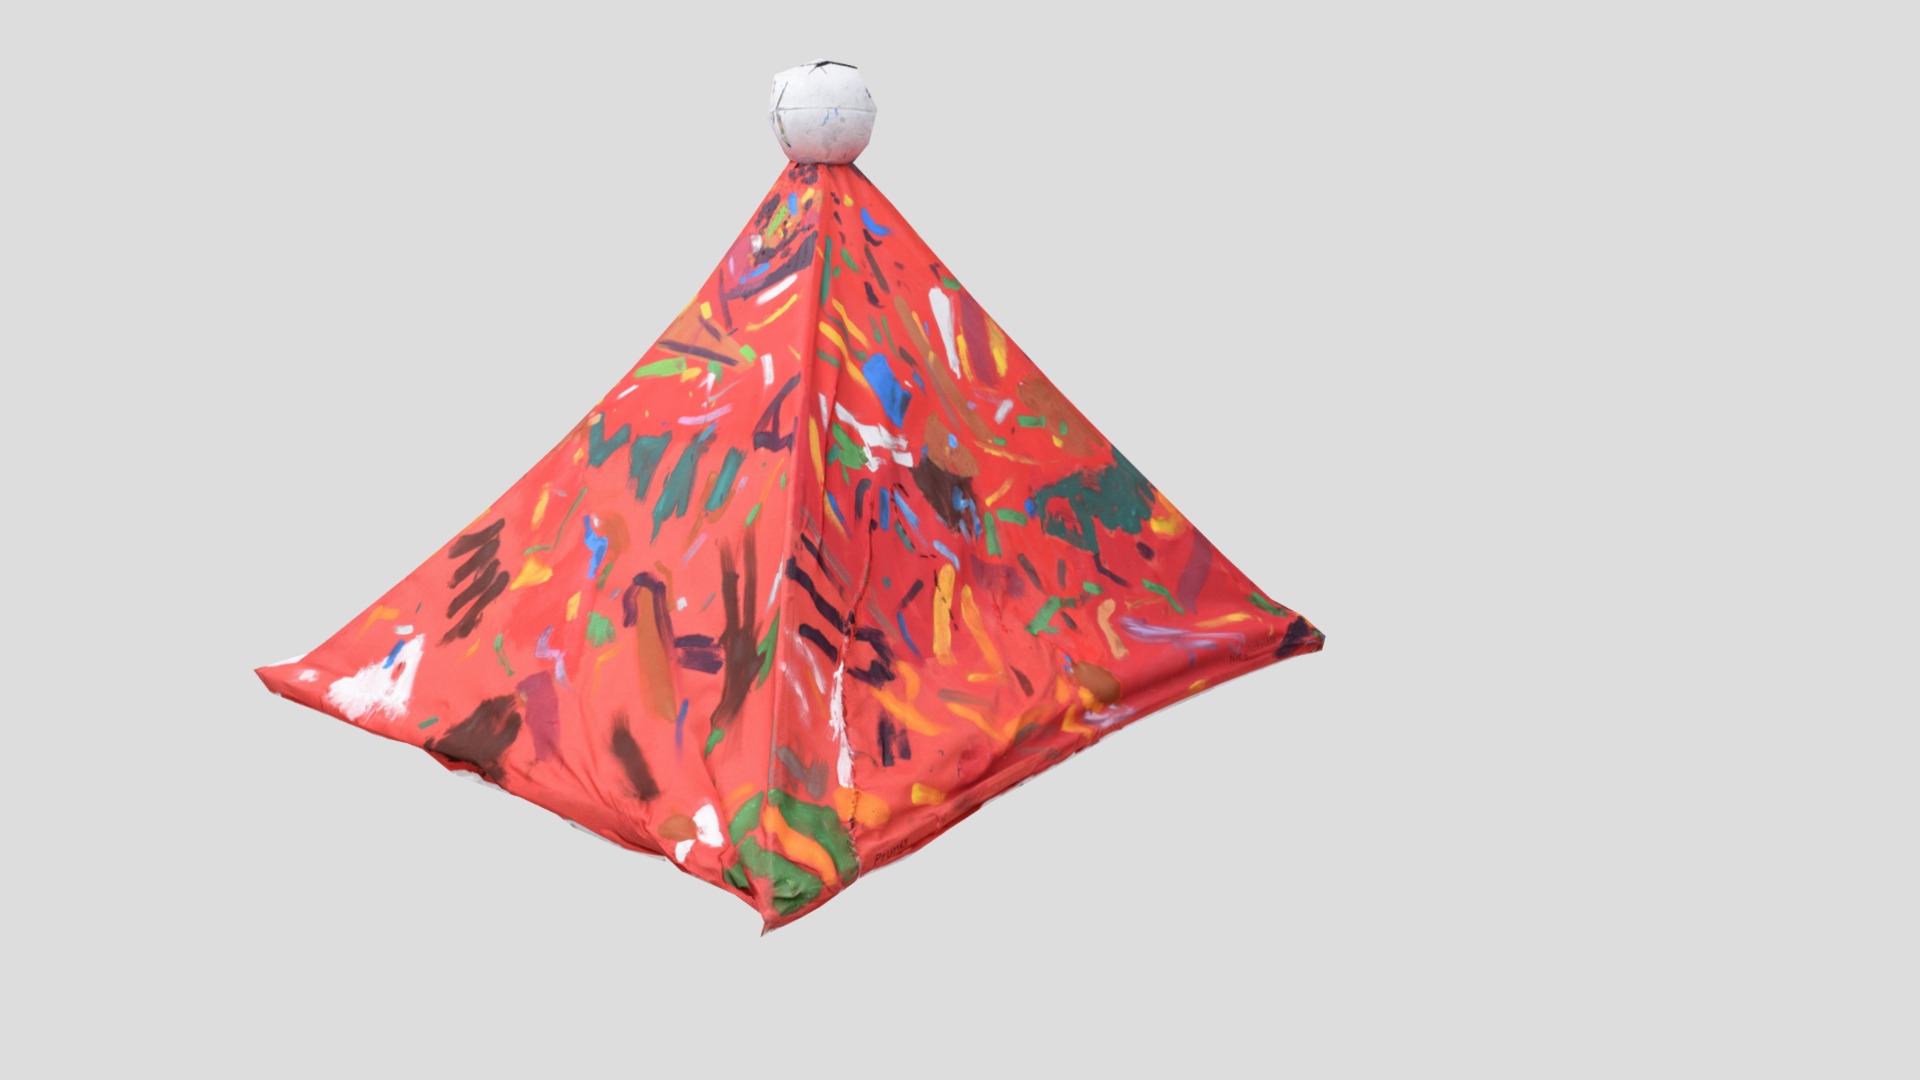 3D model Pyramide - This is a 3D model of the Pyramide. The 3D model is about a red and yellow flag.